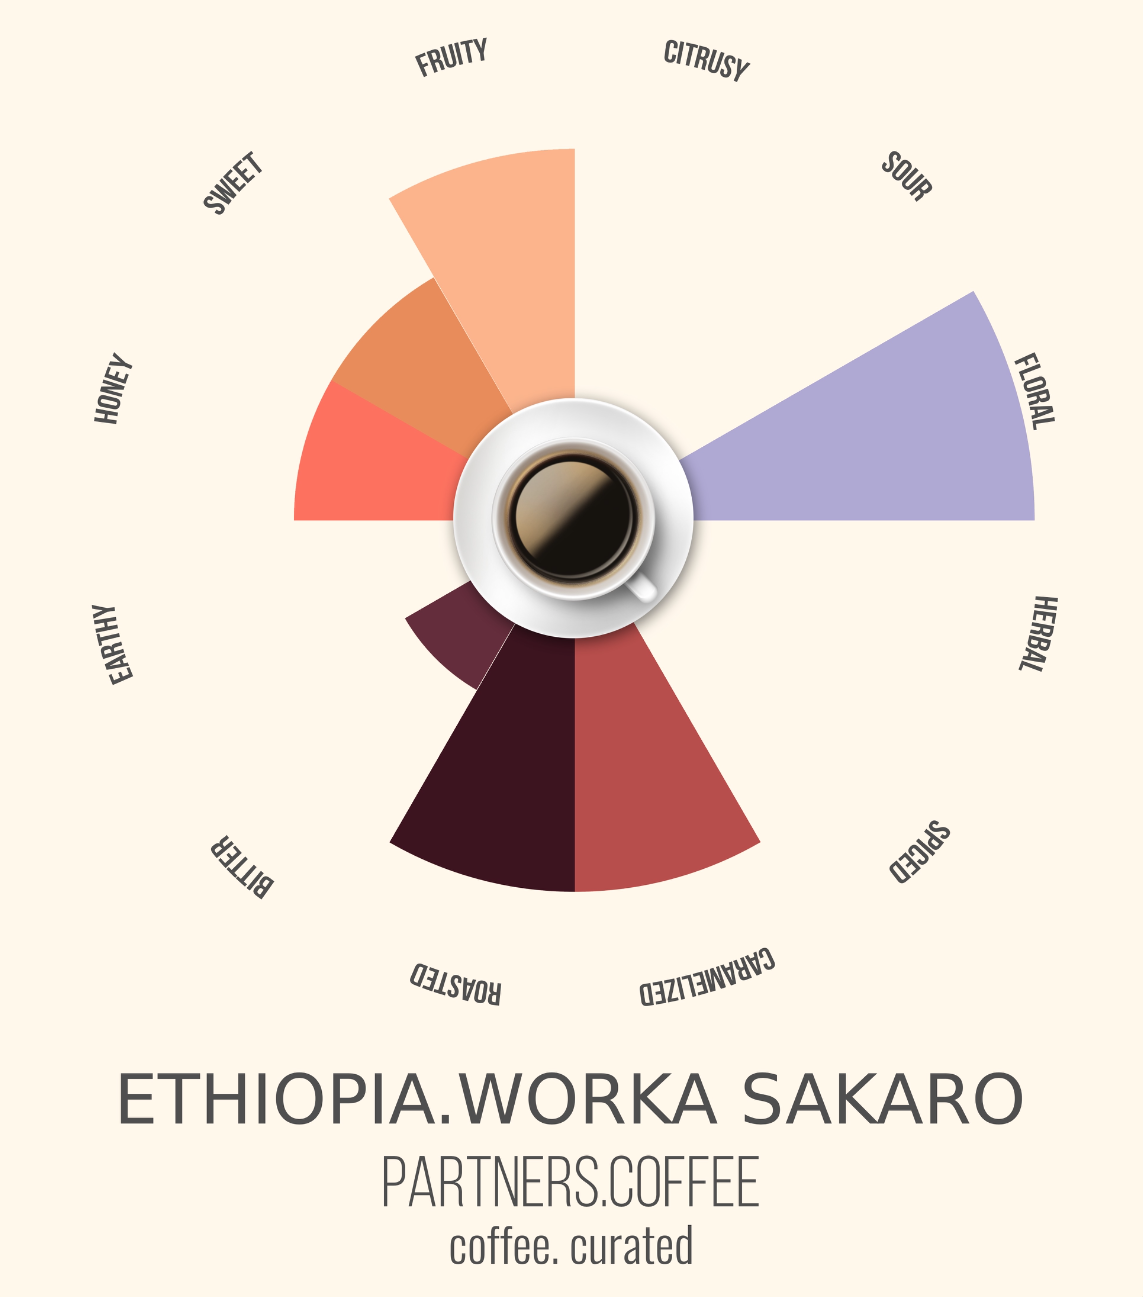 Partners Coffee Ethiopia_Coffee Curated